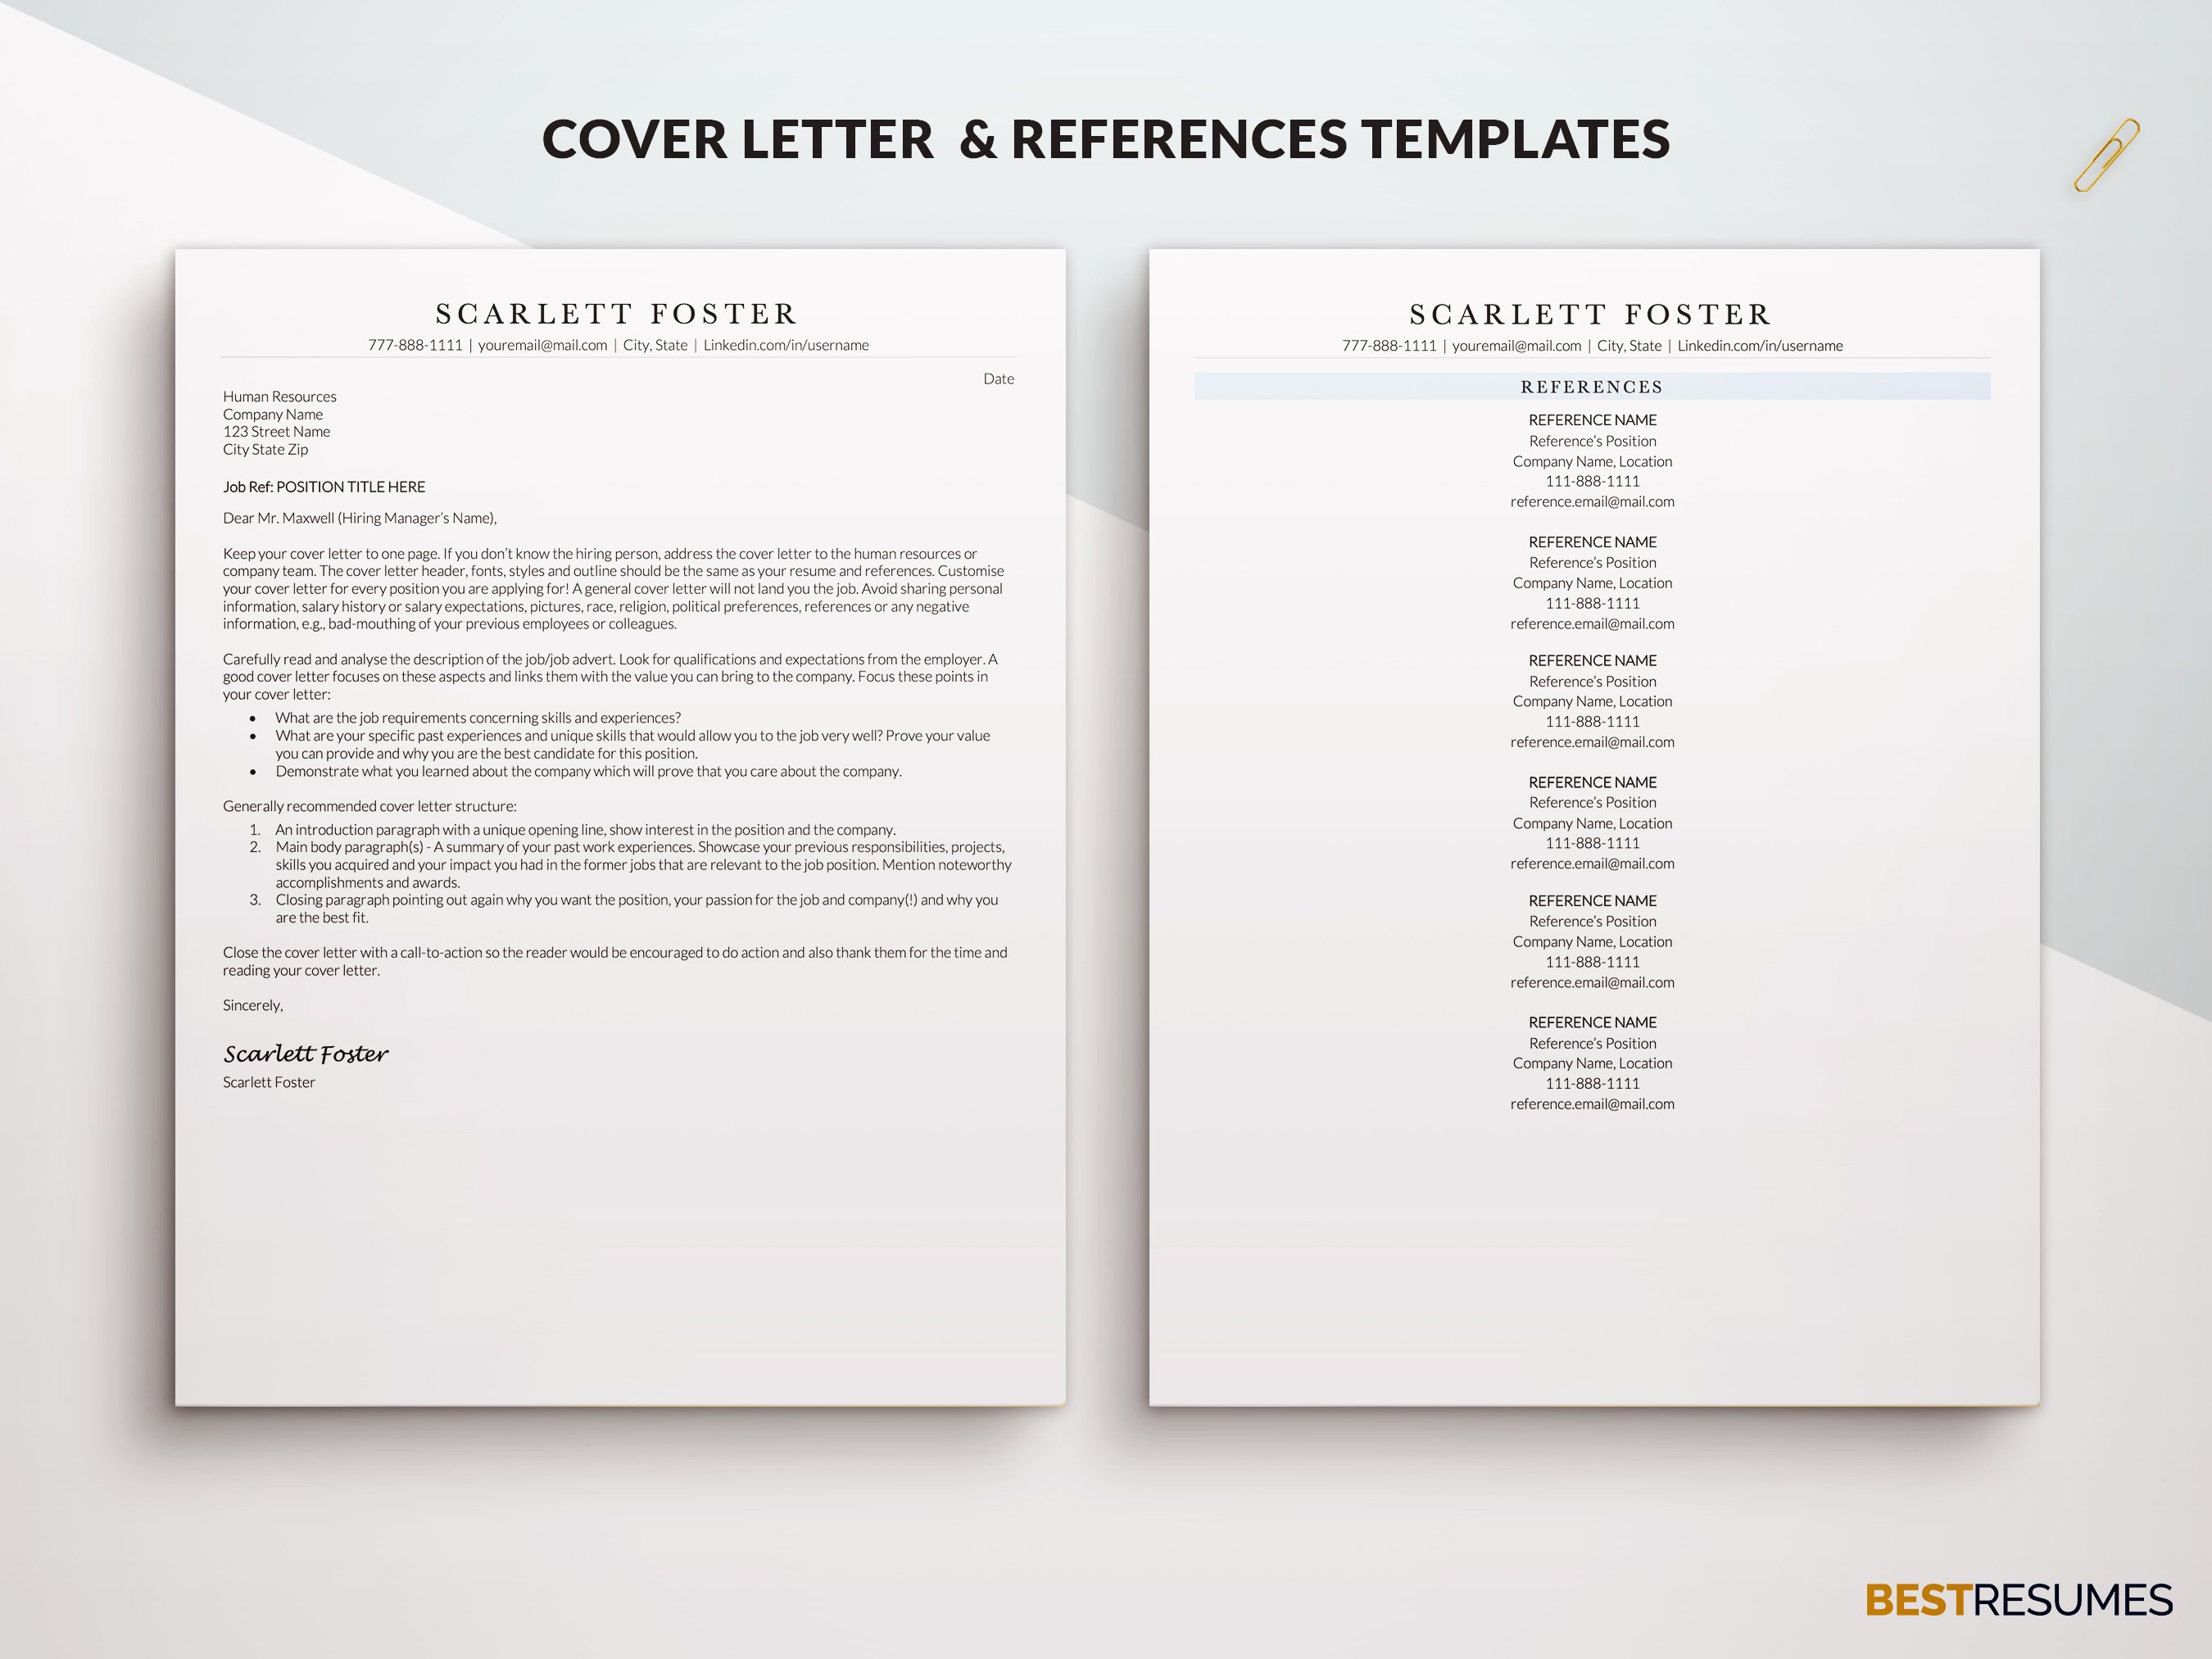 ats friendly executive resume template cover letter references scarlett foster 729